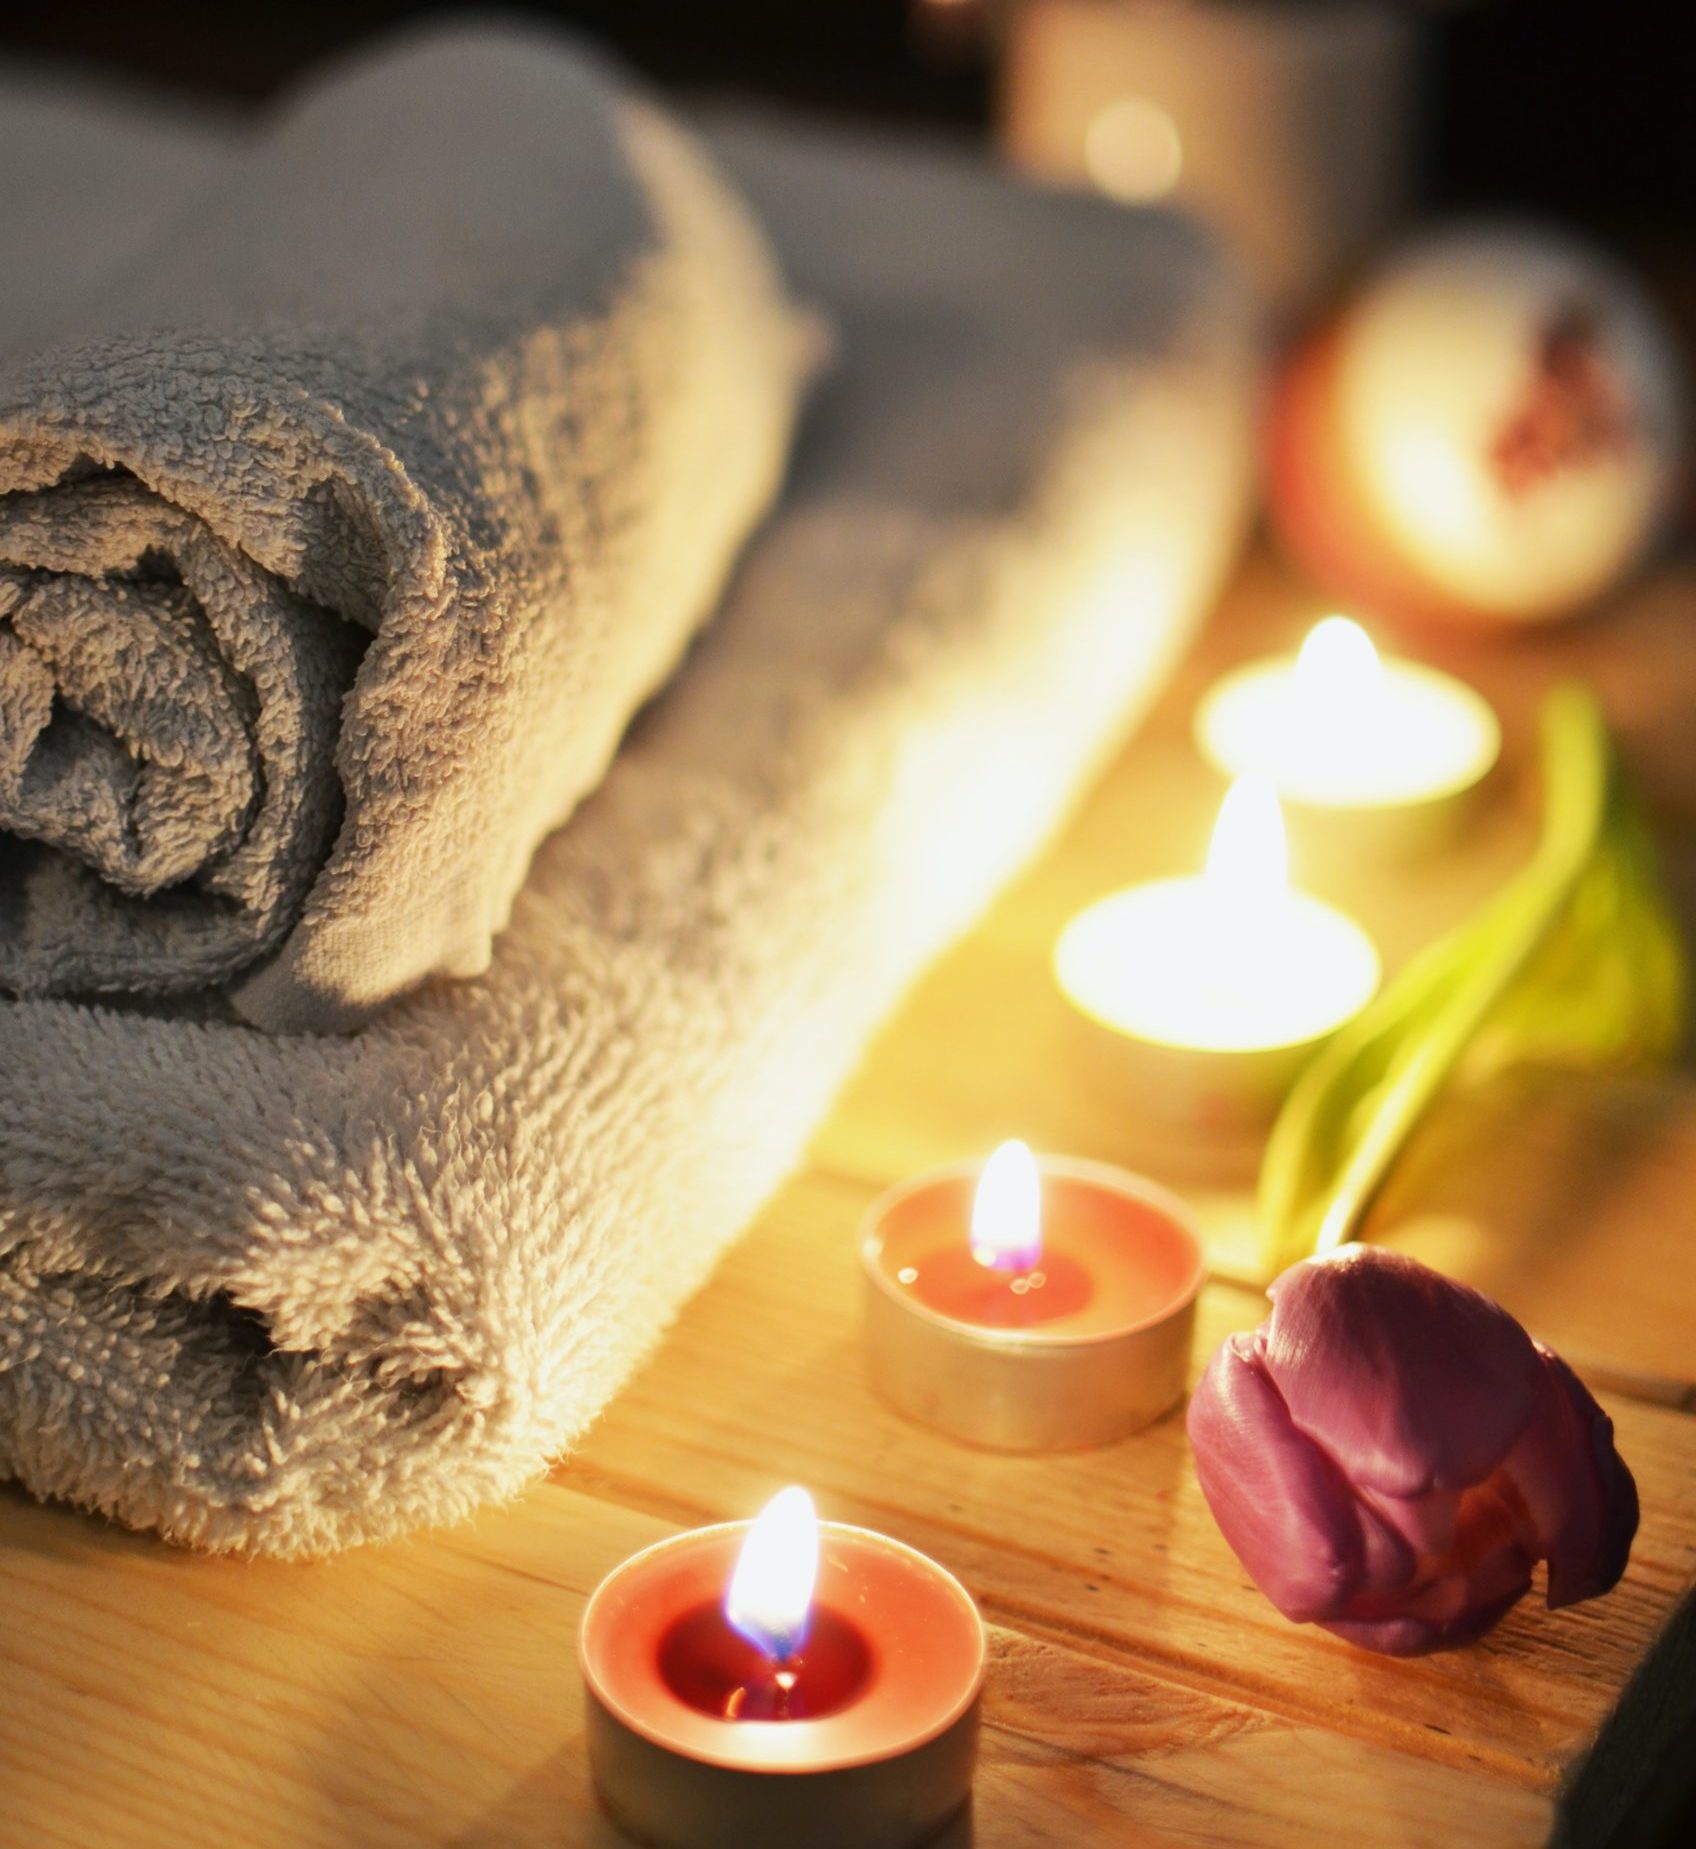 relaxing candlelit bath - perfect self-care idea